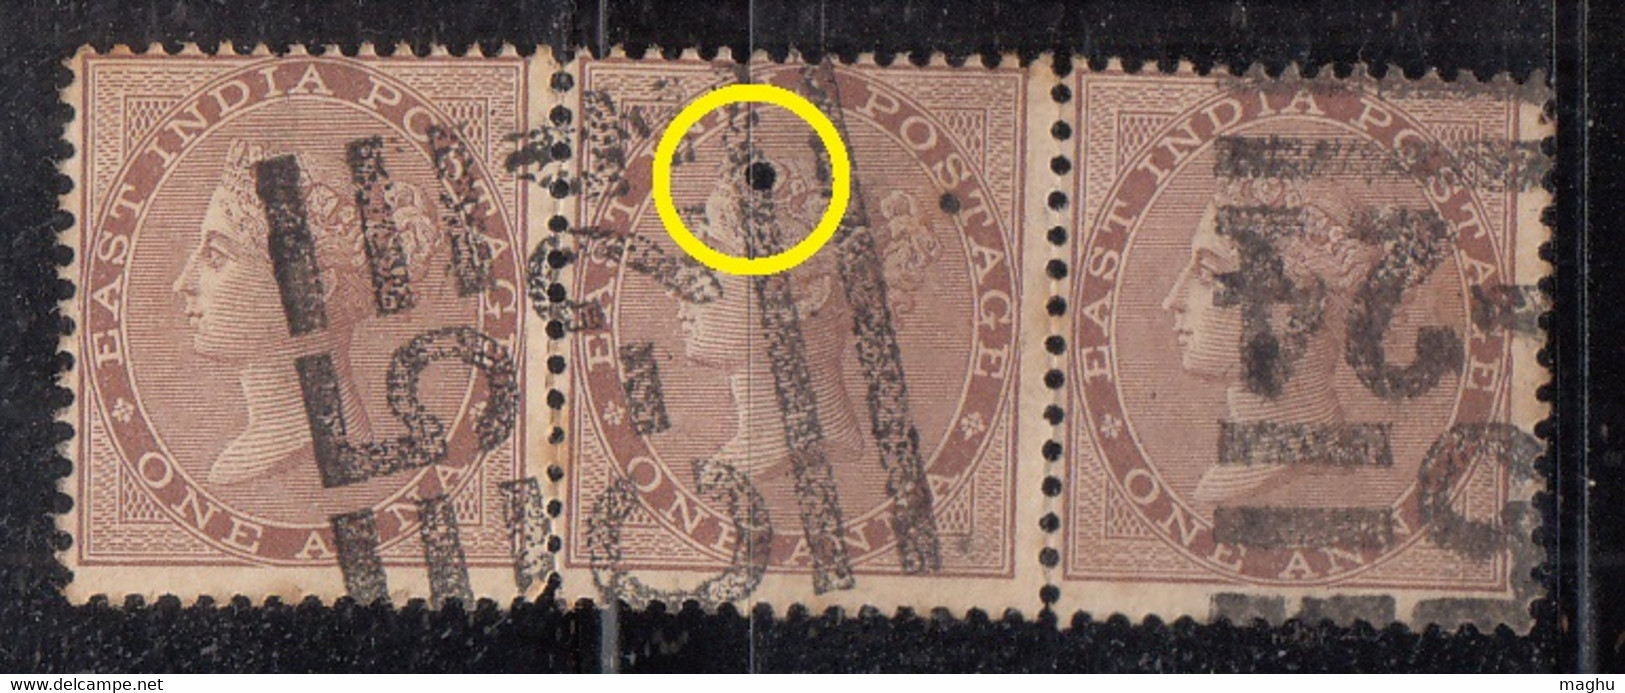 Strip Of 3, Strike Of JC 32c / Martin 17a On SG42  British East India, QV One Anna, Used, No Water Mark 1856 (Pin Hole - 1854 East India Company Administration